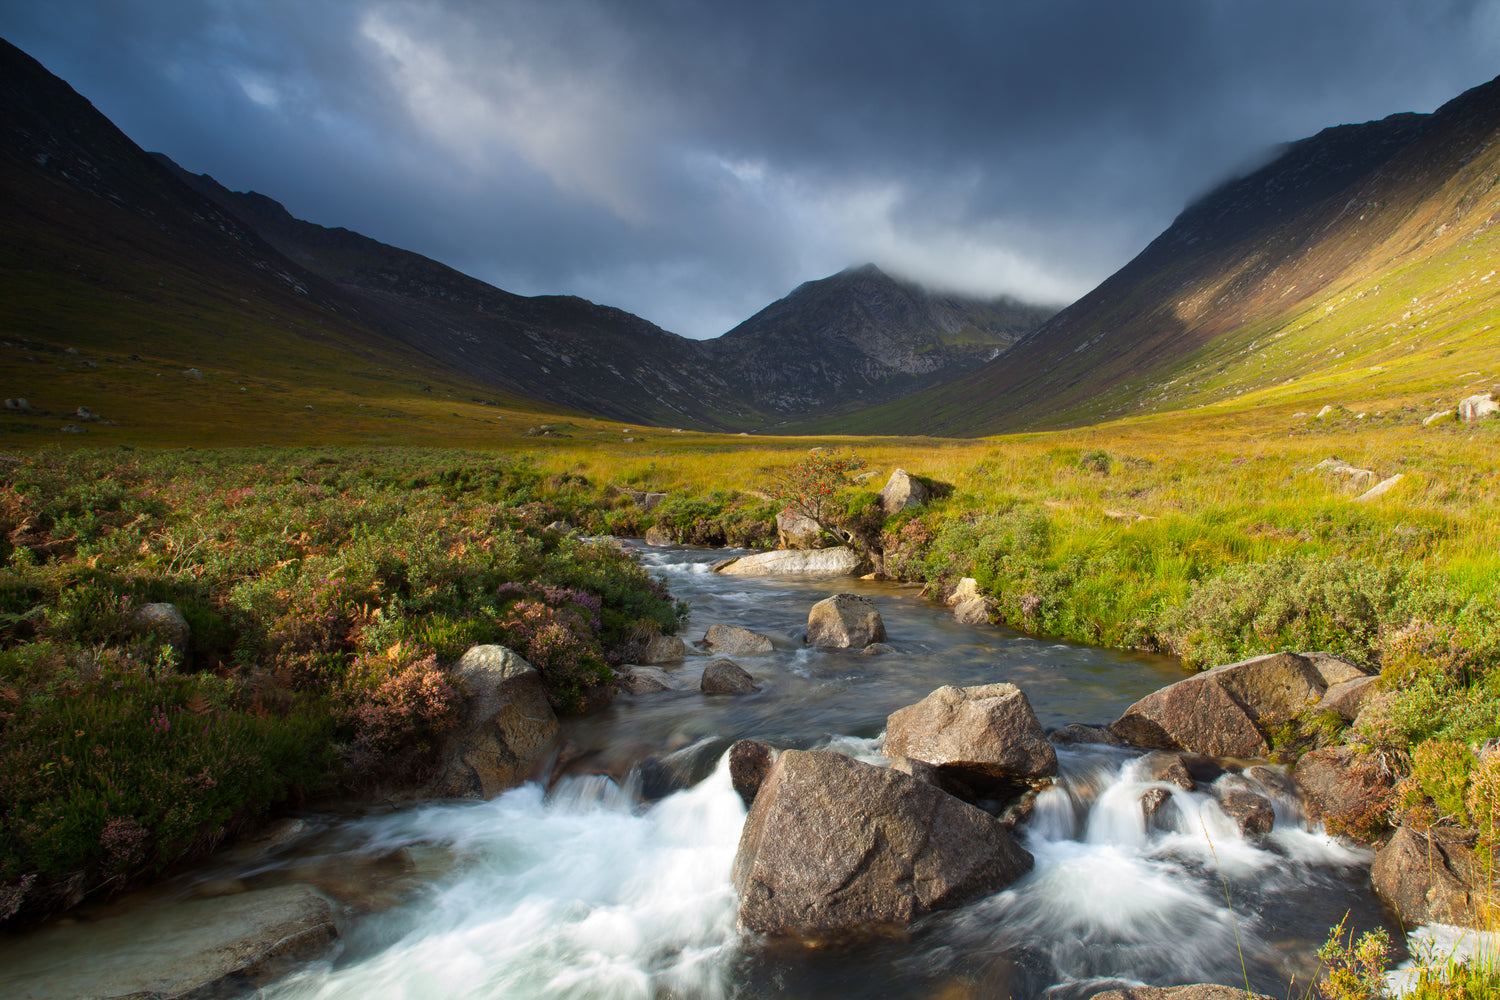 Scotland, North Ayrshire, Isle of Arran. Glen Sannox, a remote valley surrounded by mountains on the Island of Arran